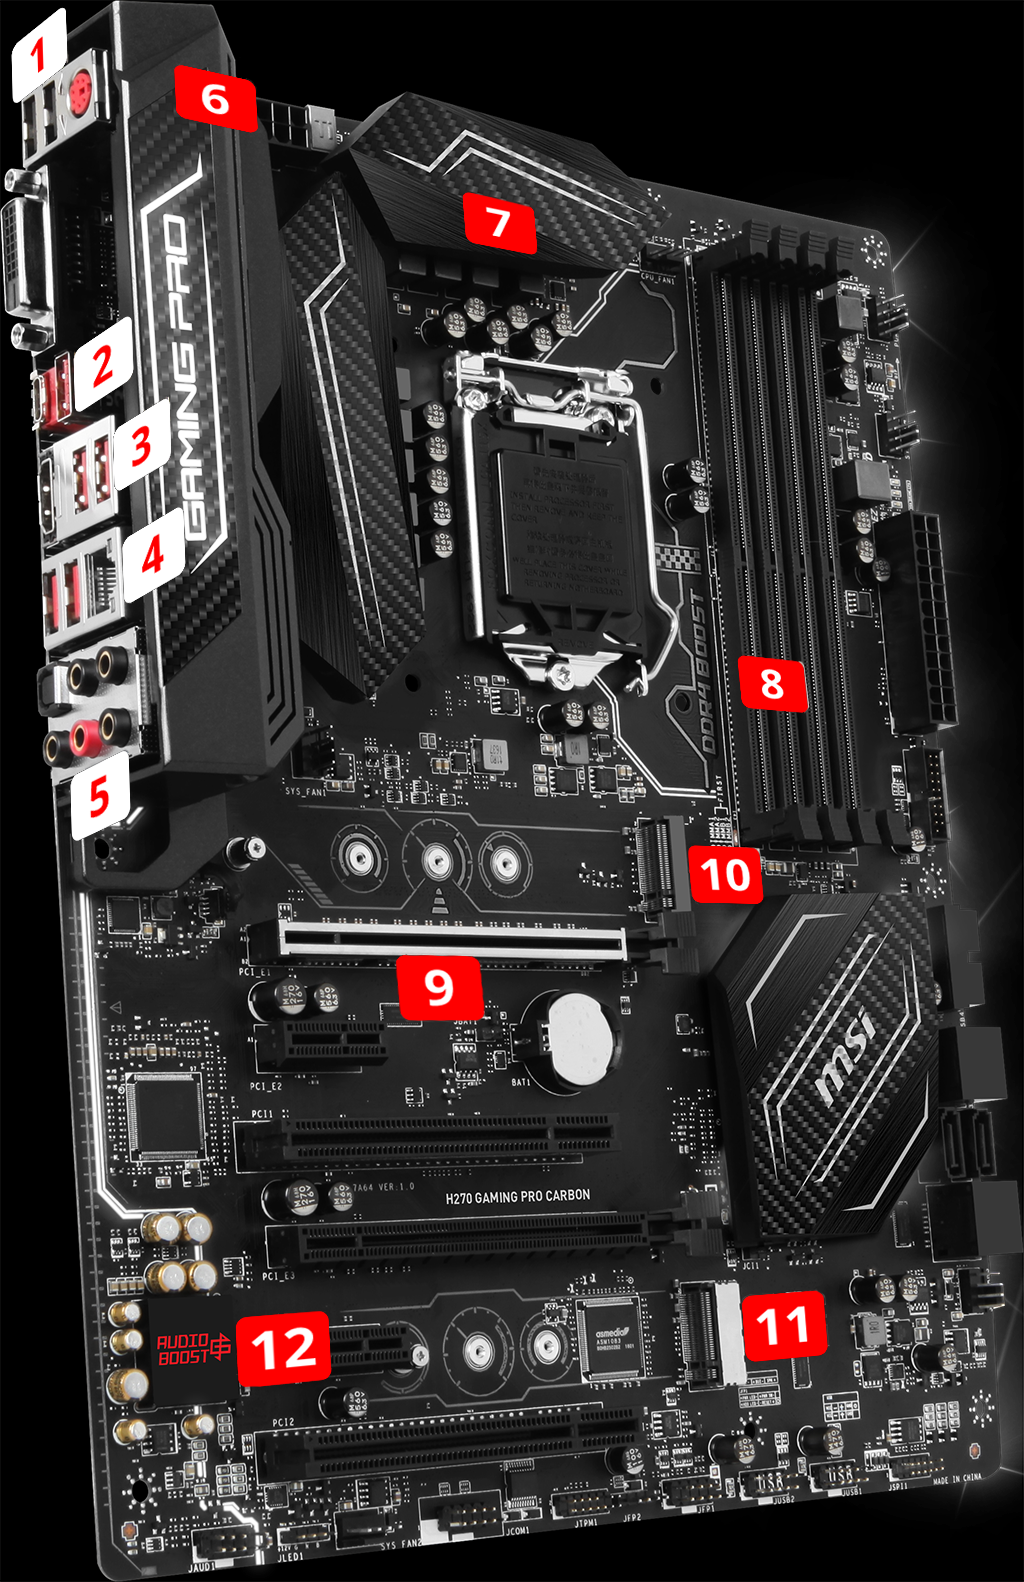 MSI H270 Gaming Pro Carbon Motherboard | Techbuy Australia